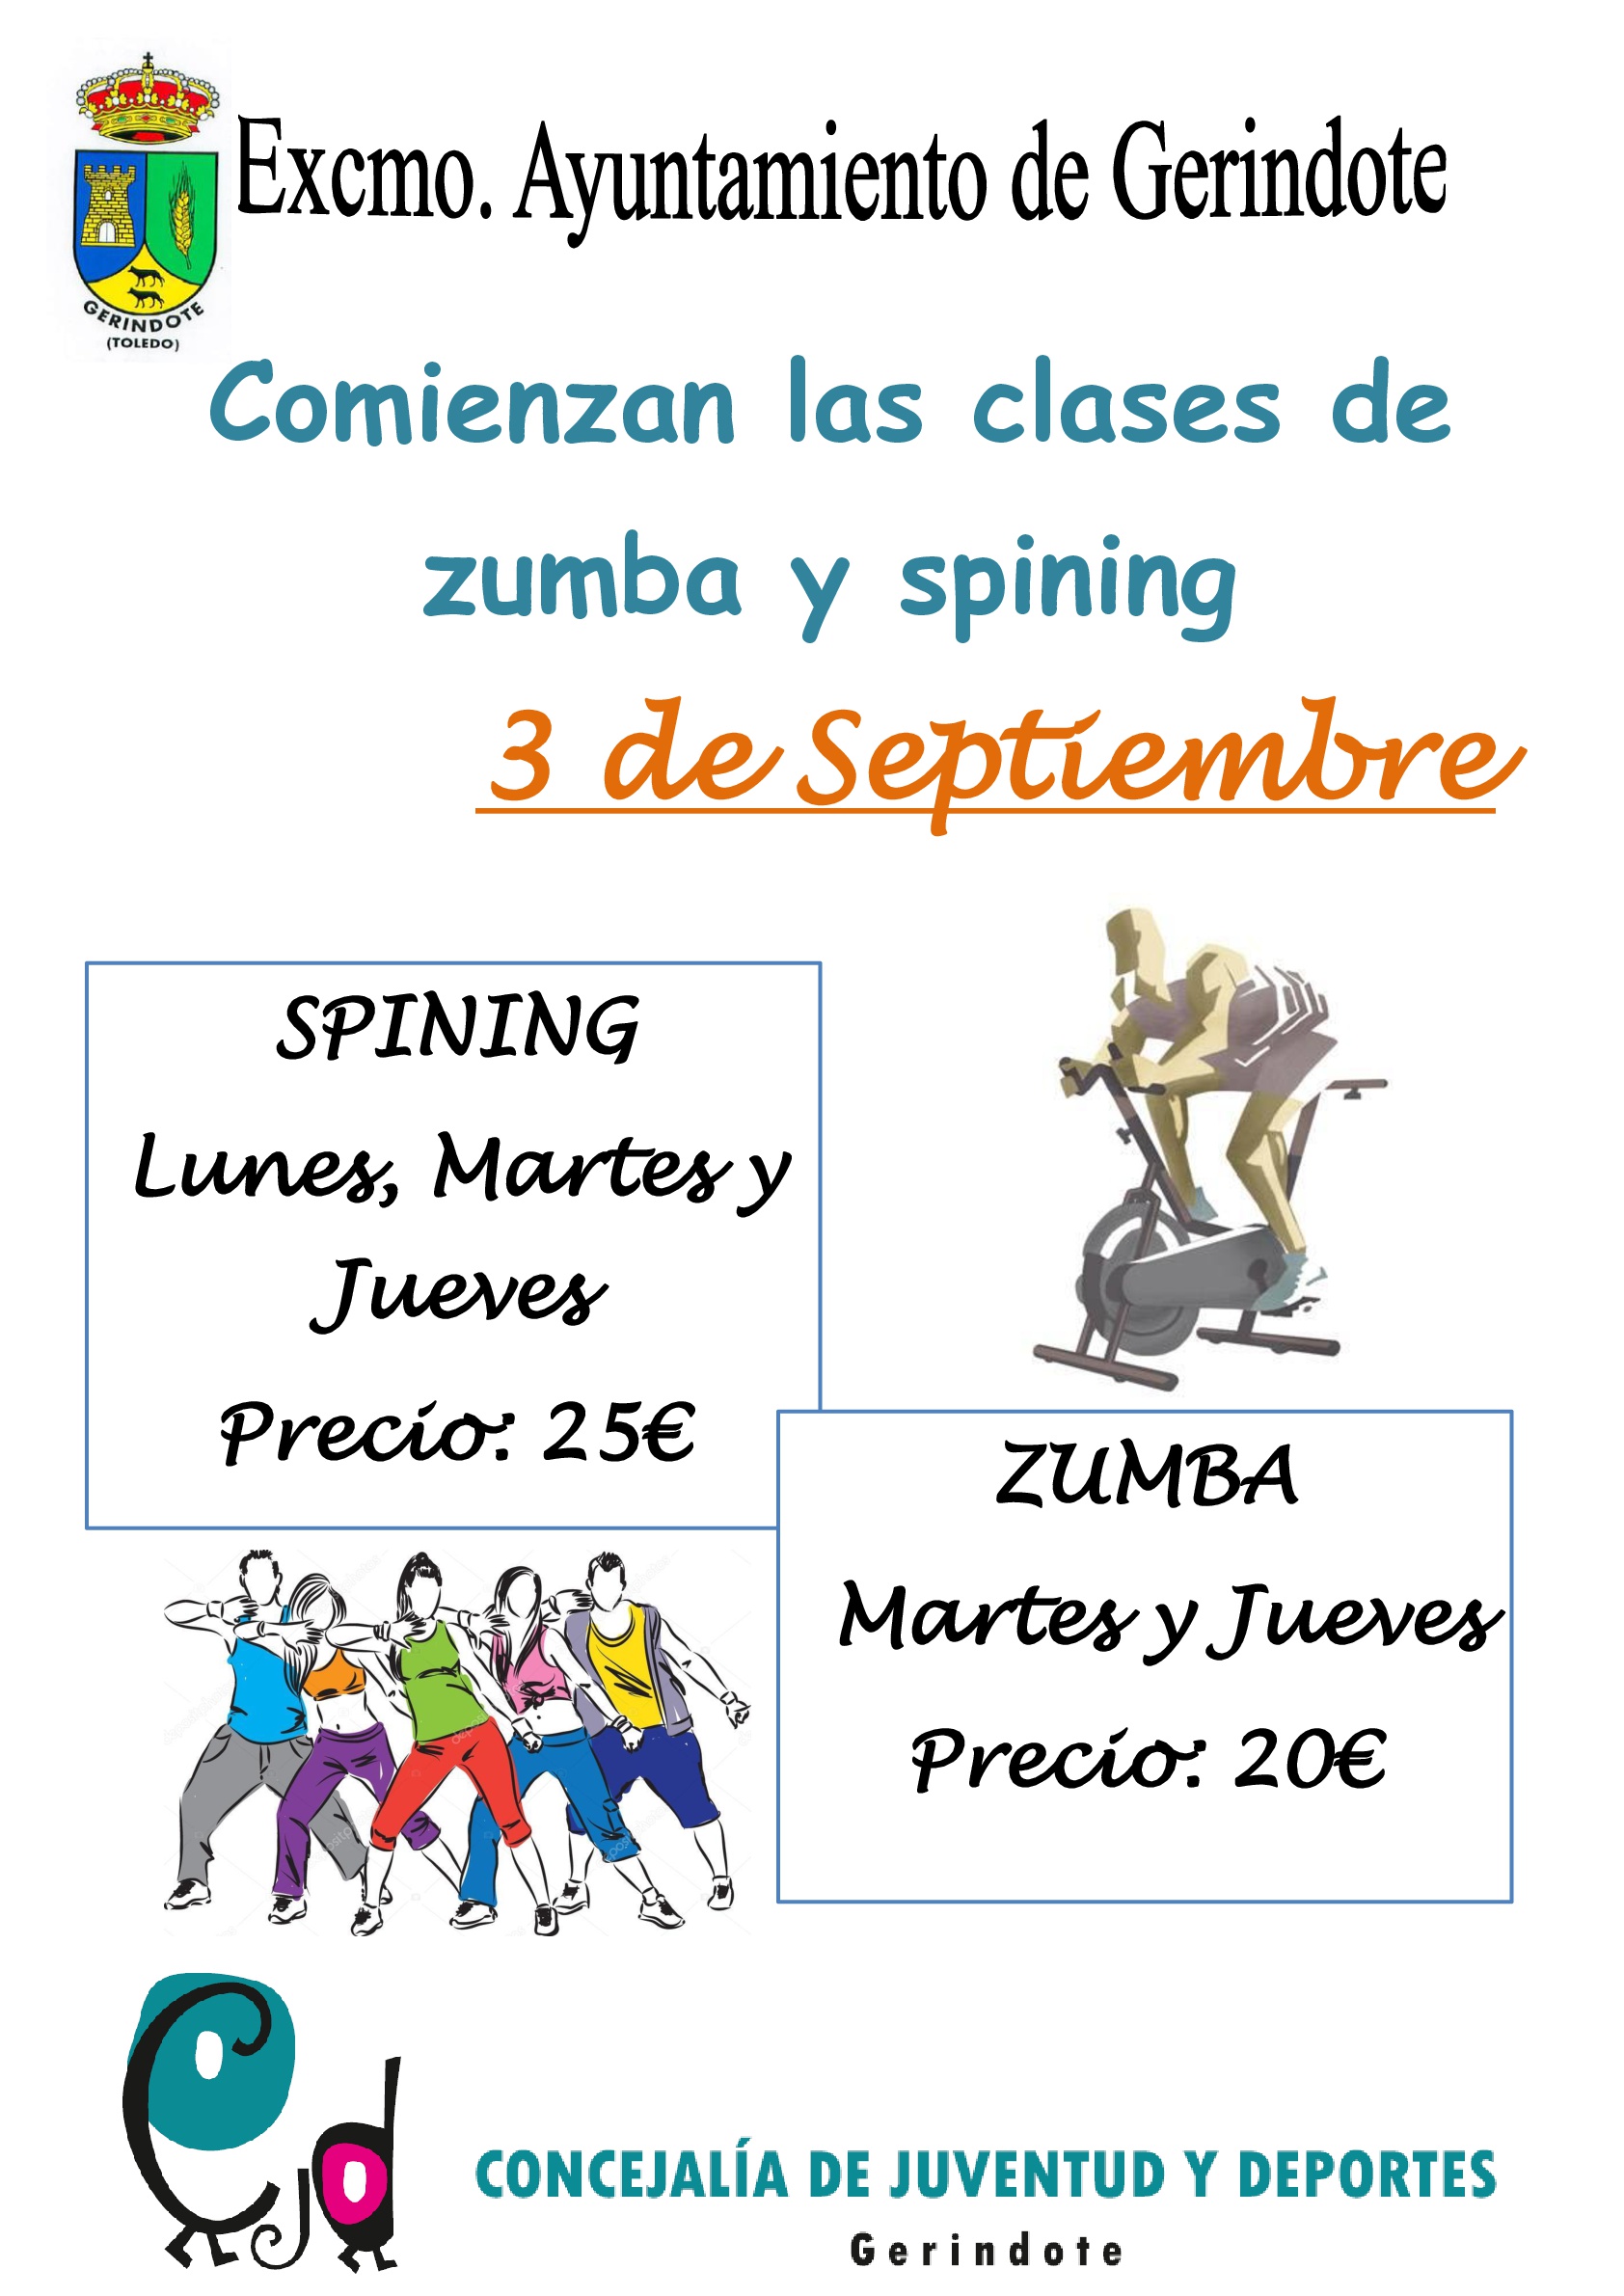 2018-CLASES ZUMBA Y SPINING-001.jpg